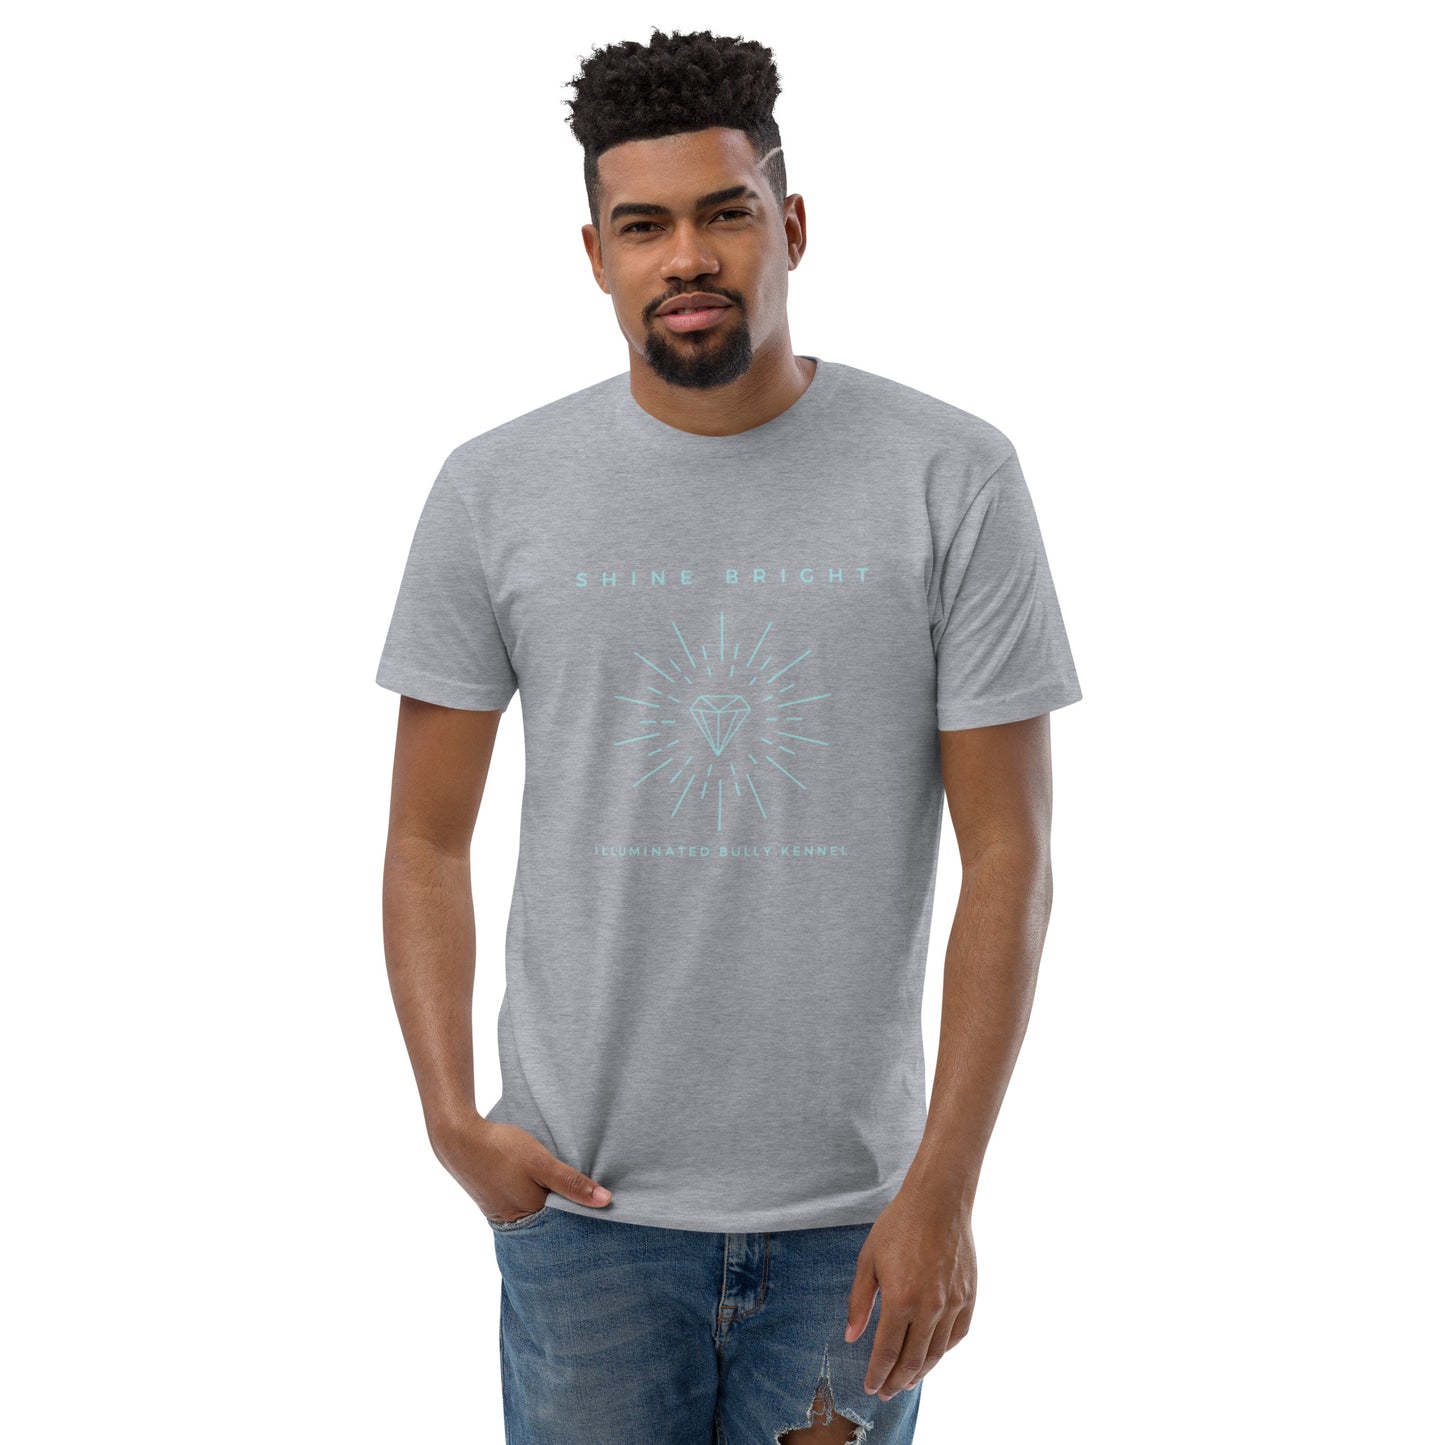 Shine Bright - Men's fitted tee